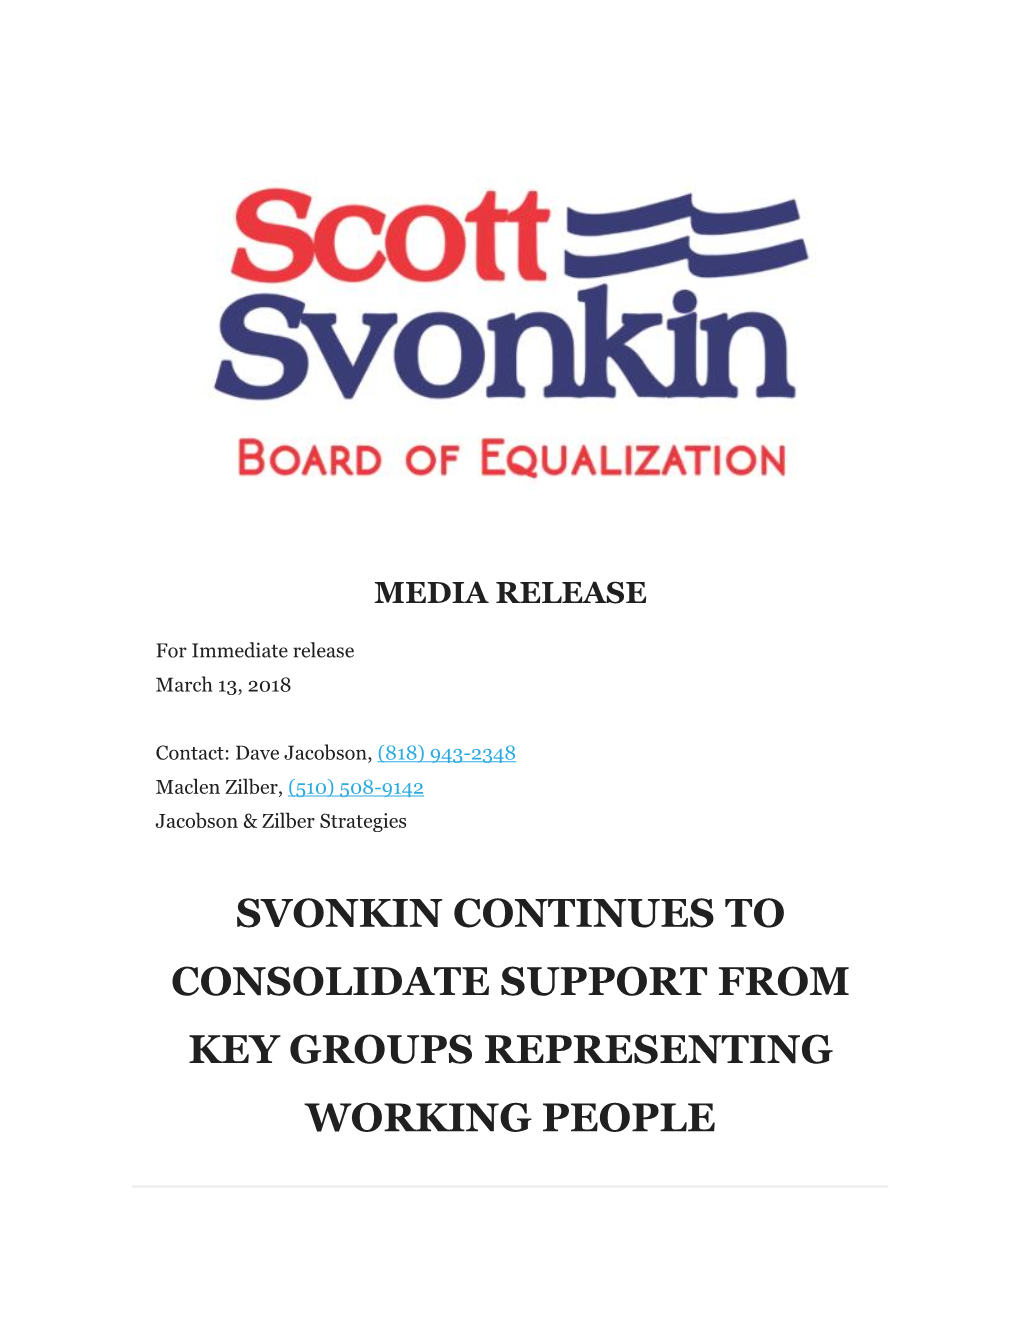 Svonkin Continues to Consolidate Support from Key Groups Representing